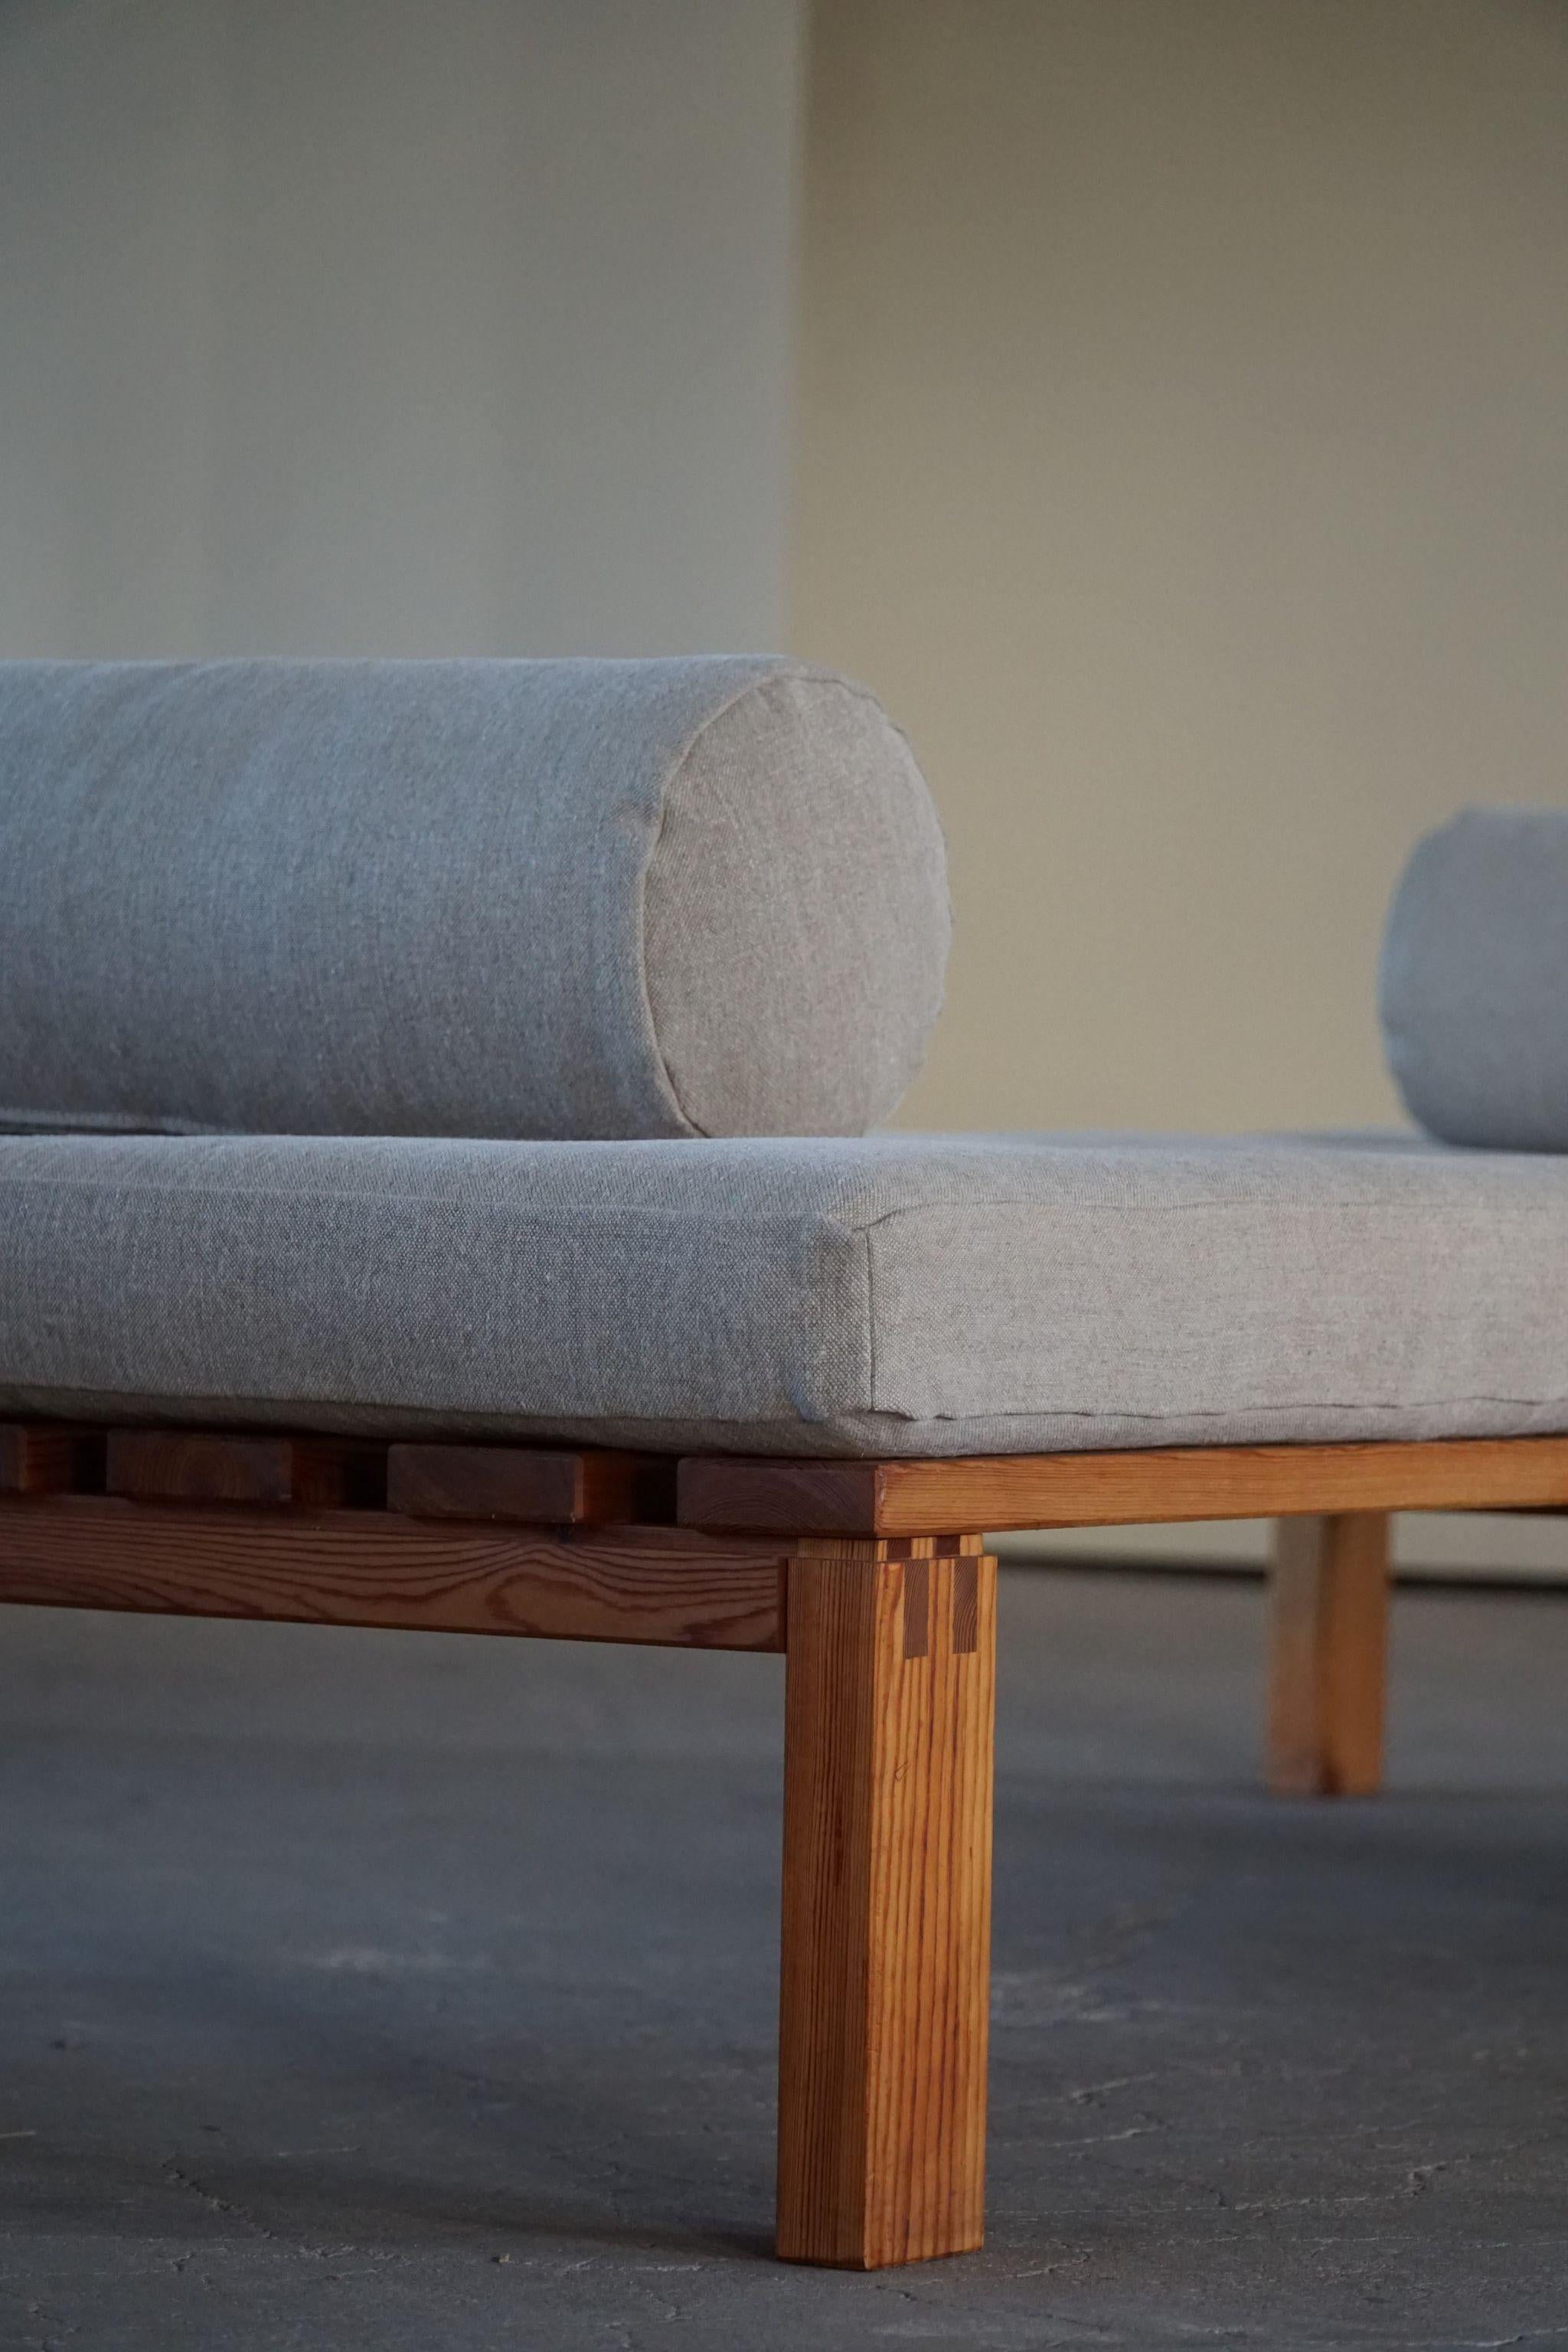 20th Century Nyt I Bo Daybed, Made in Pine, Reupholstered, Danish Mid-Century Modern, 1970s